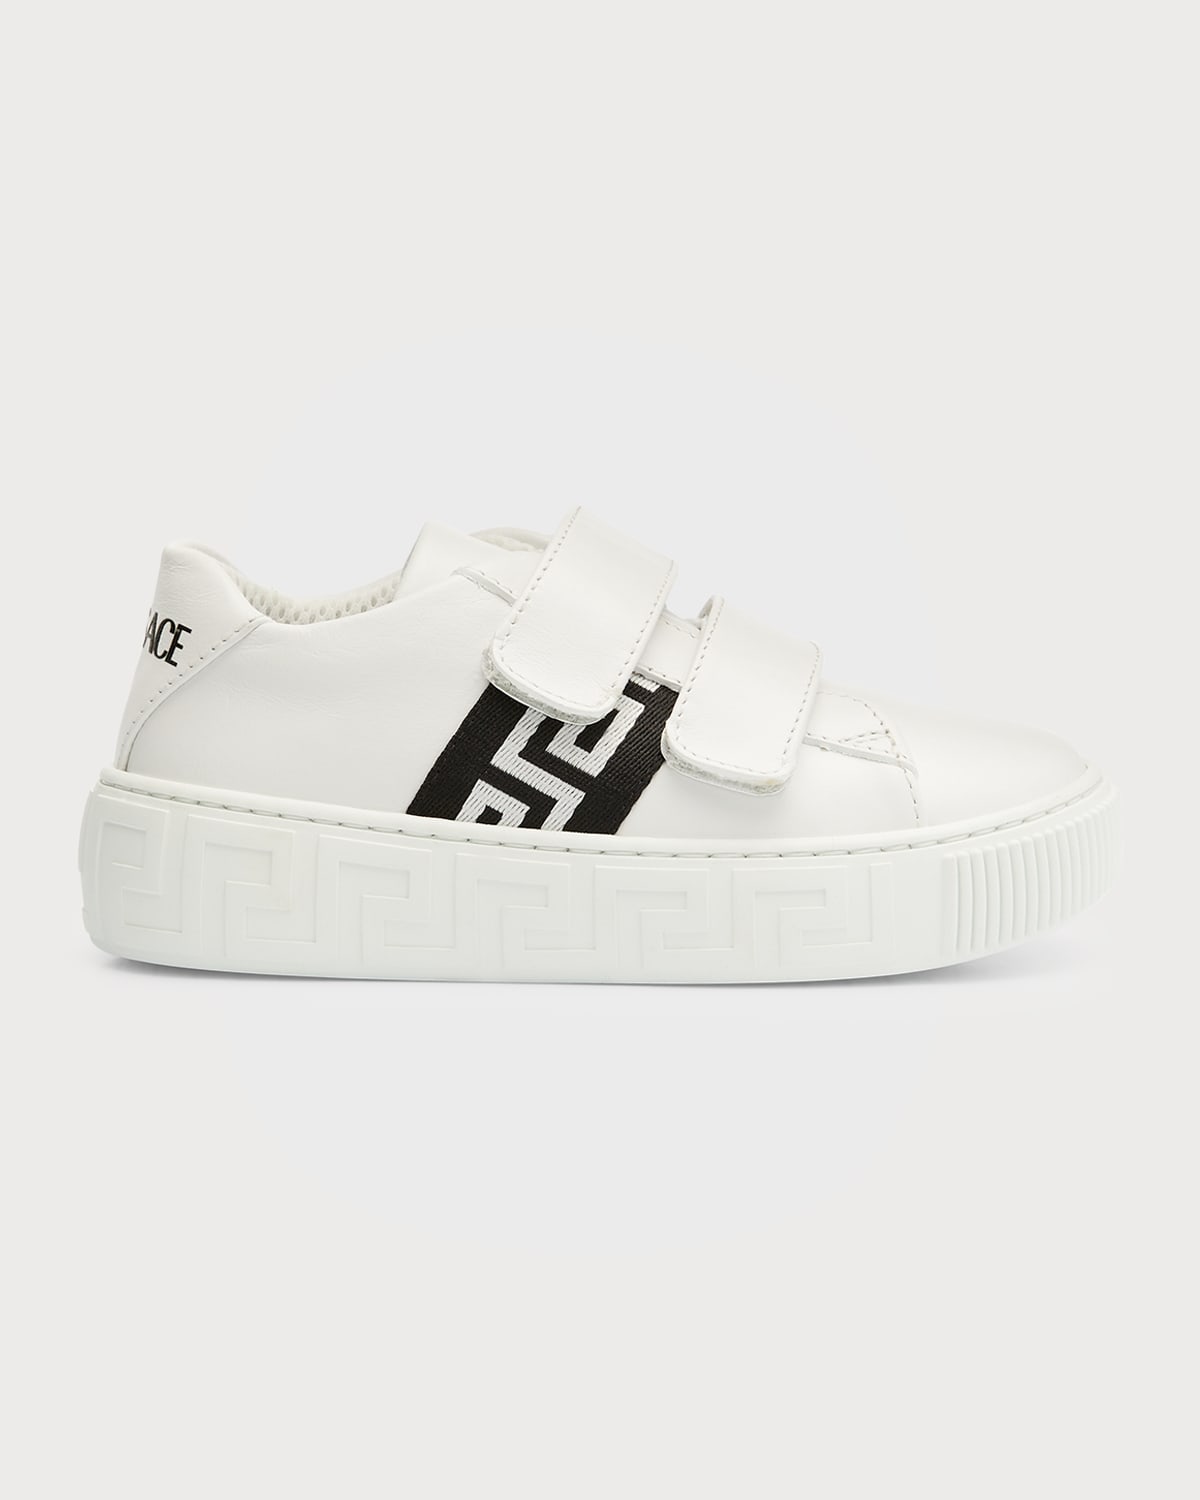 Versace Kid's Greca Leather Grip-strap Trainers, Toddlers/kids In White